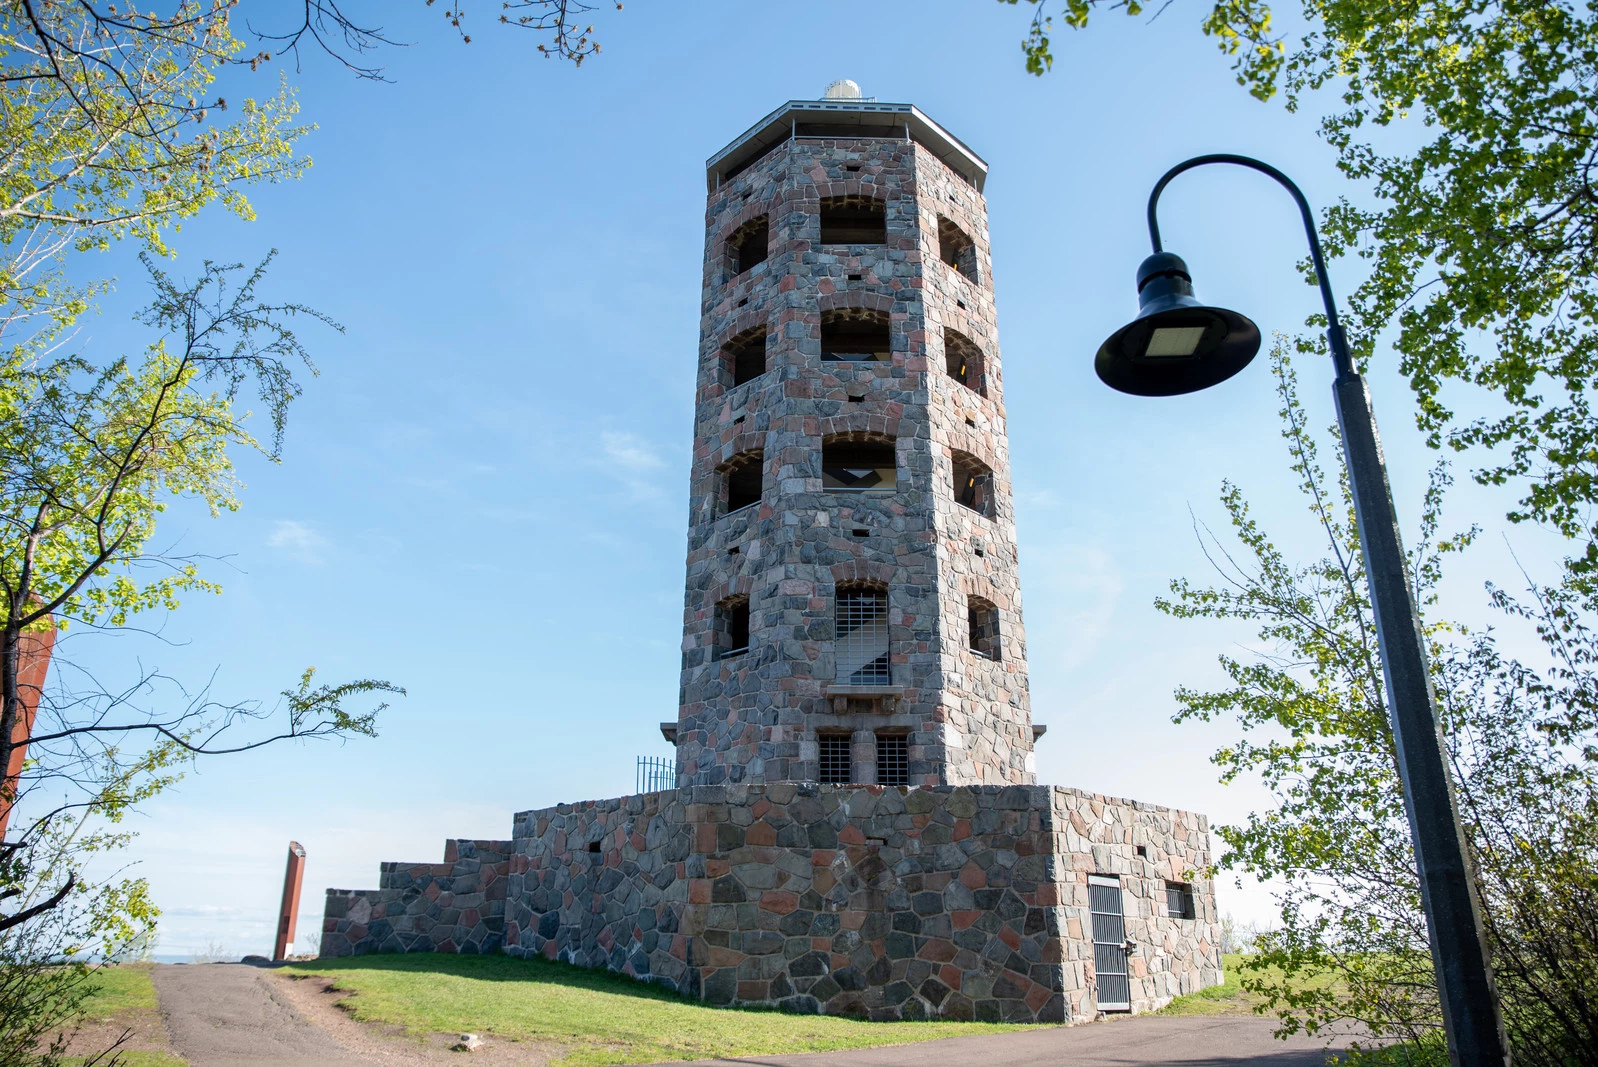 Enger Tower: The History Of Duluth's Popular Lookout Tower